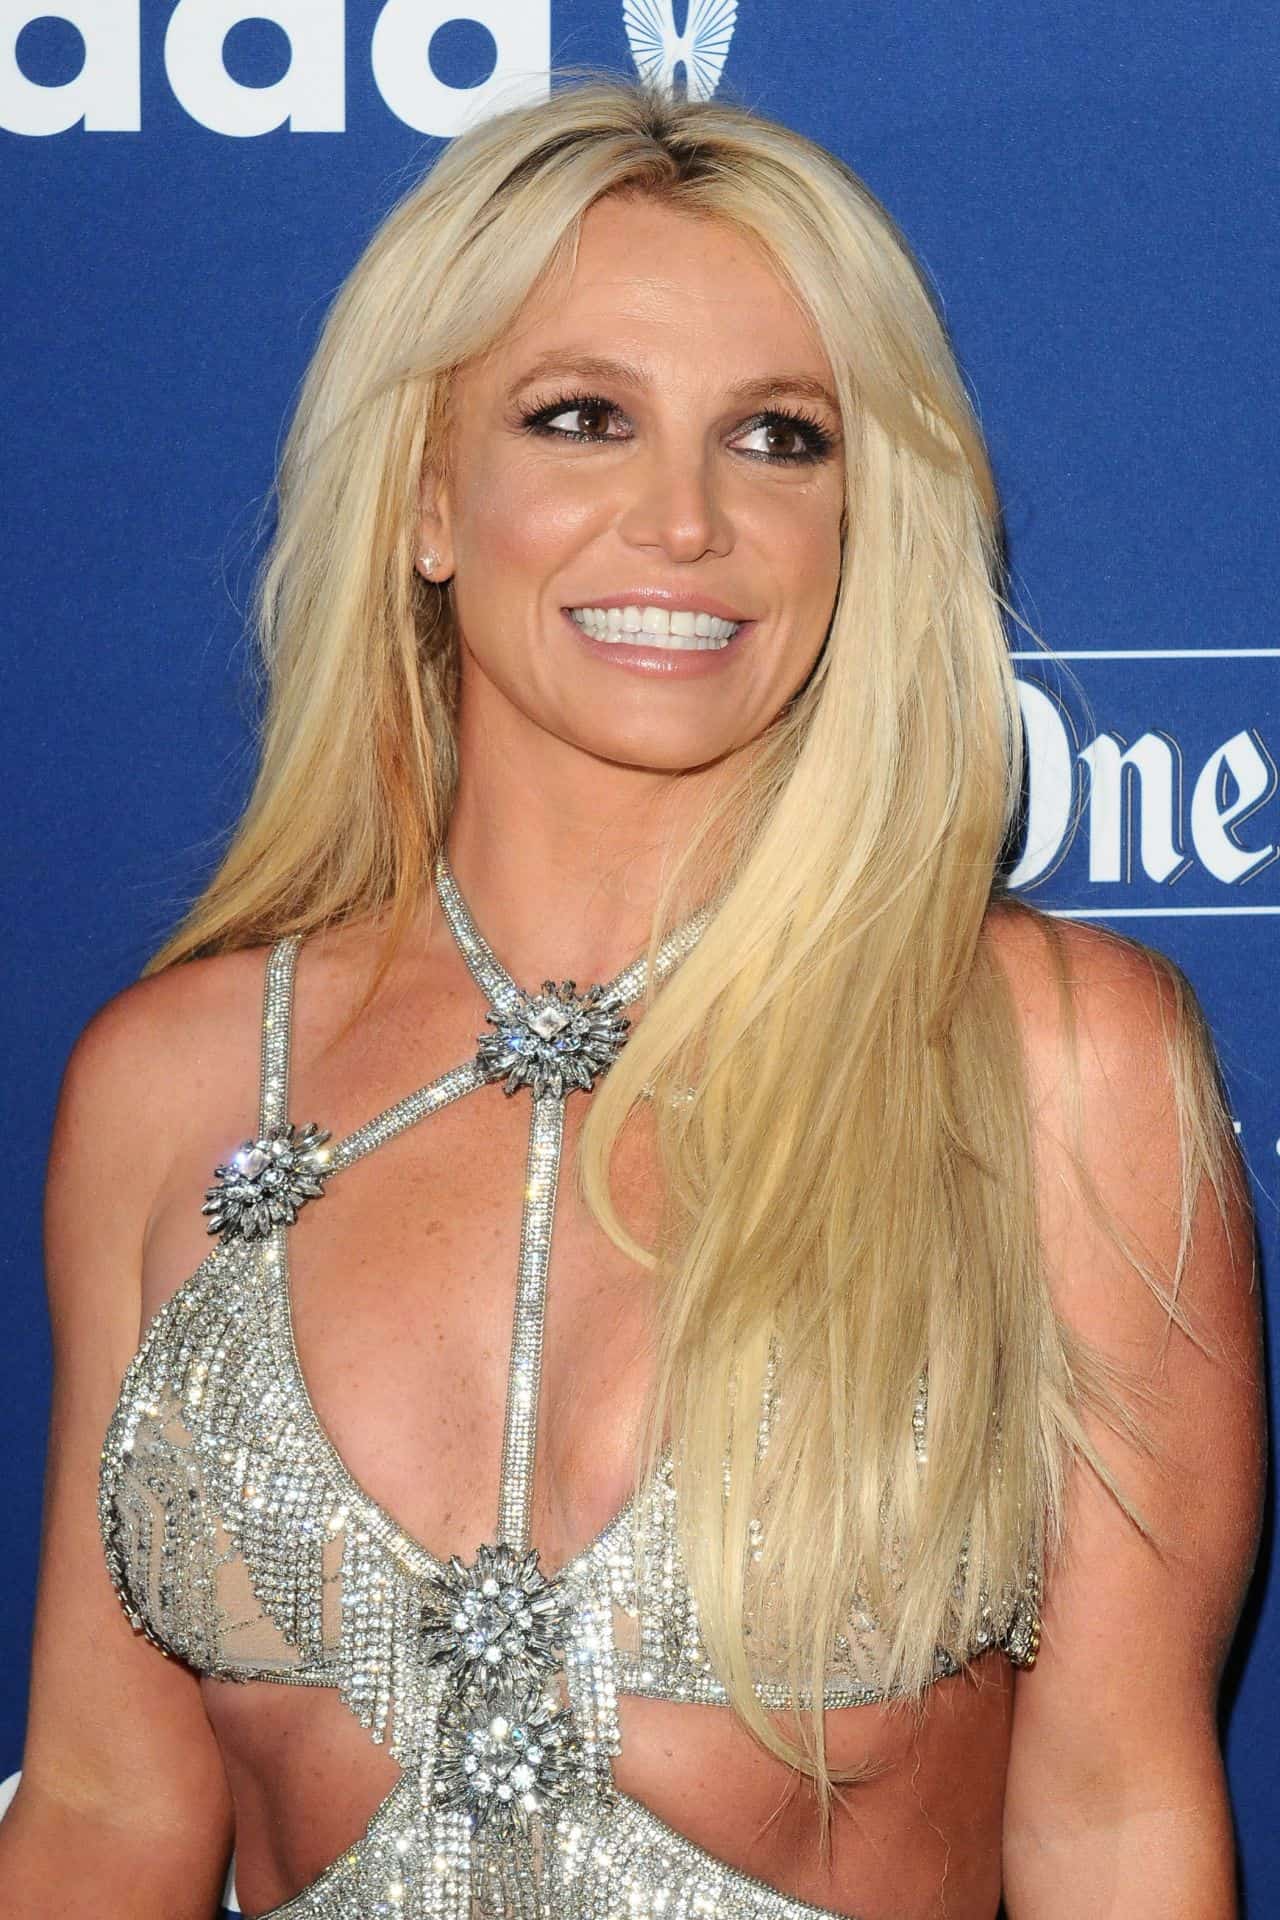 Britney Spears Dazzles in a Silver Dress at the GLAAD Media Awards